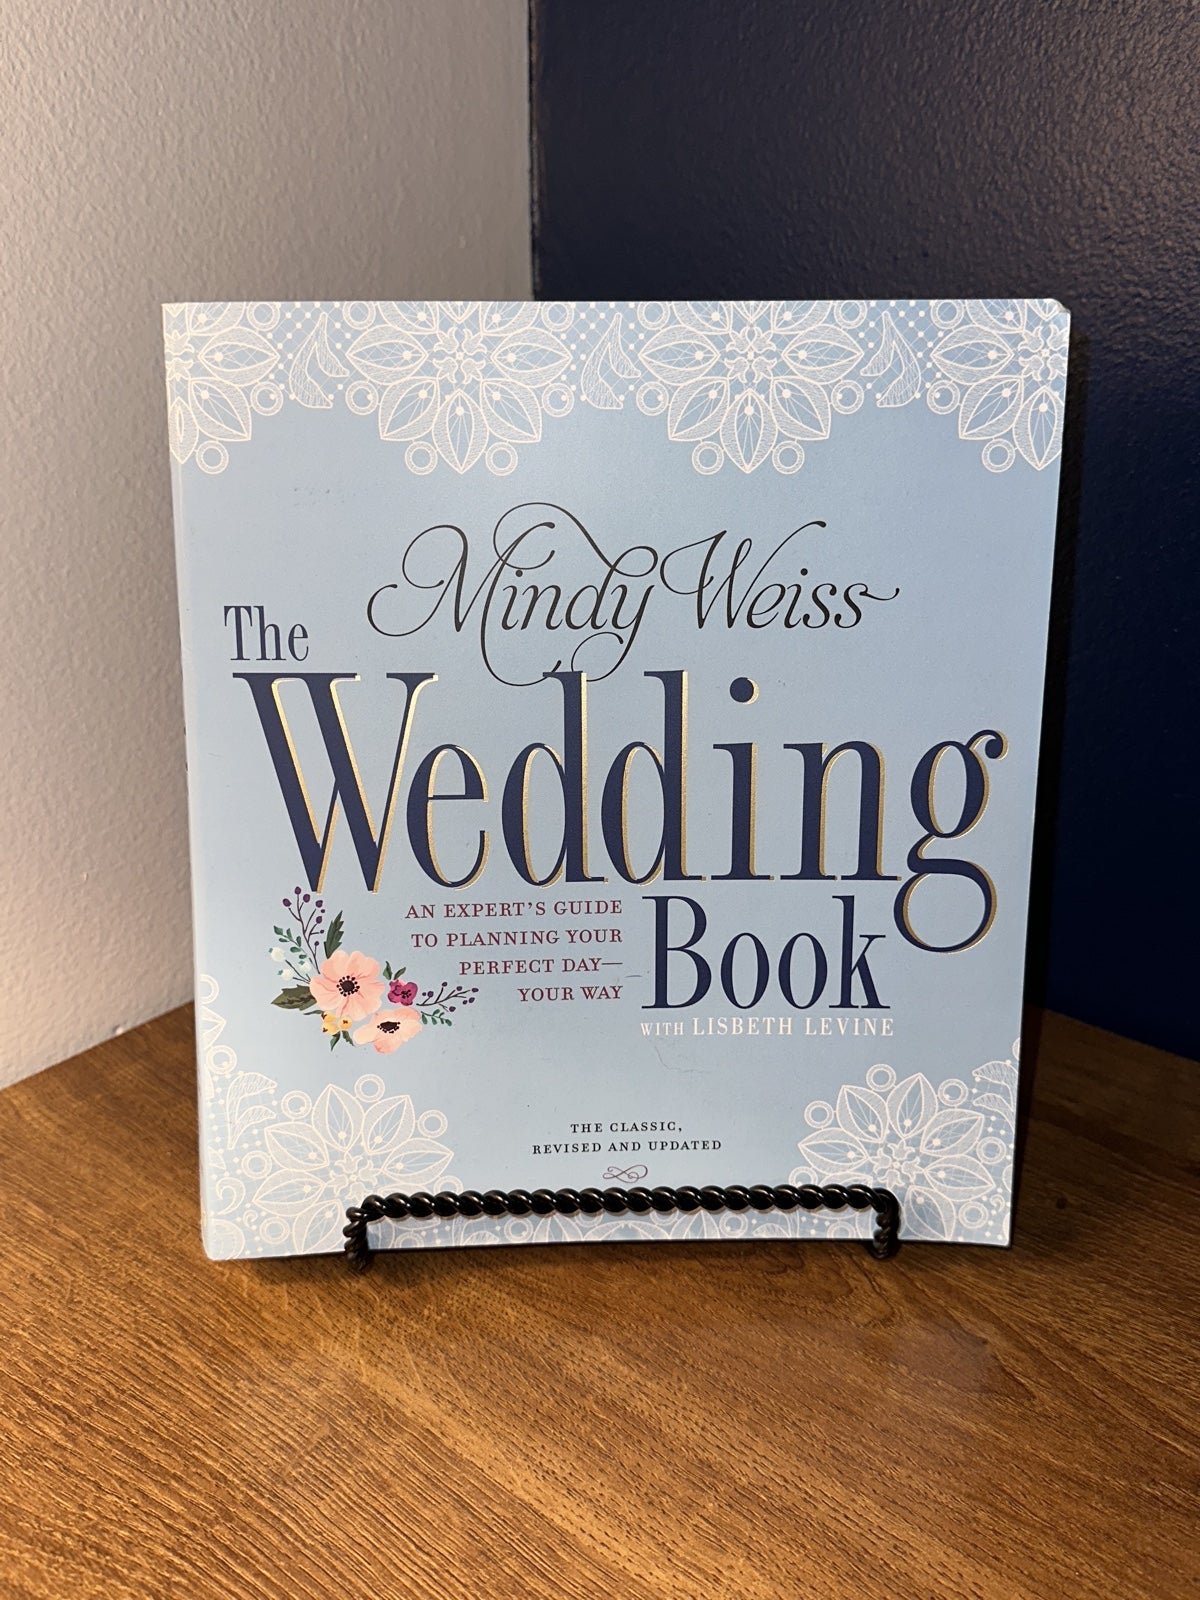 The Wedding Book- An Expects Guide to Planning foqfmEIqG